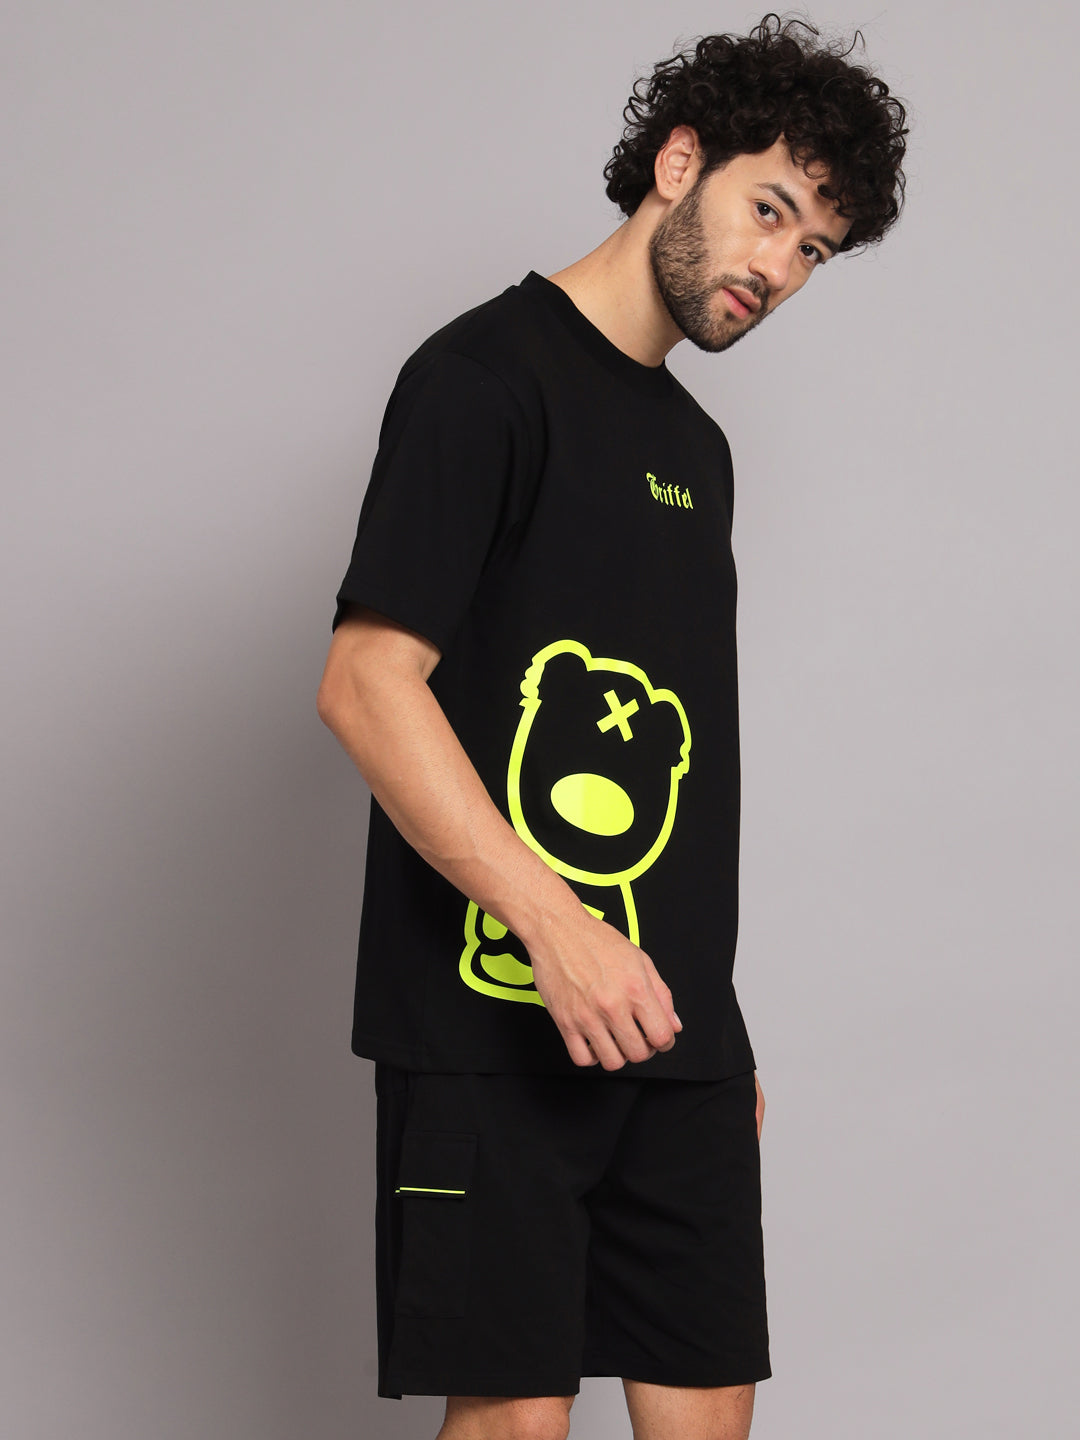 GRIFFEL Men Printed Black Green Loose fit T-shirt and Shorts Set - griffel